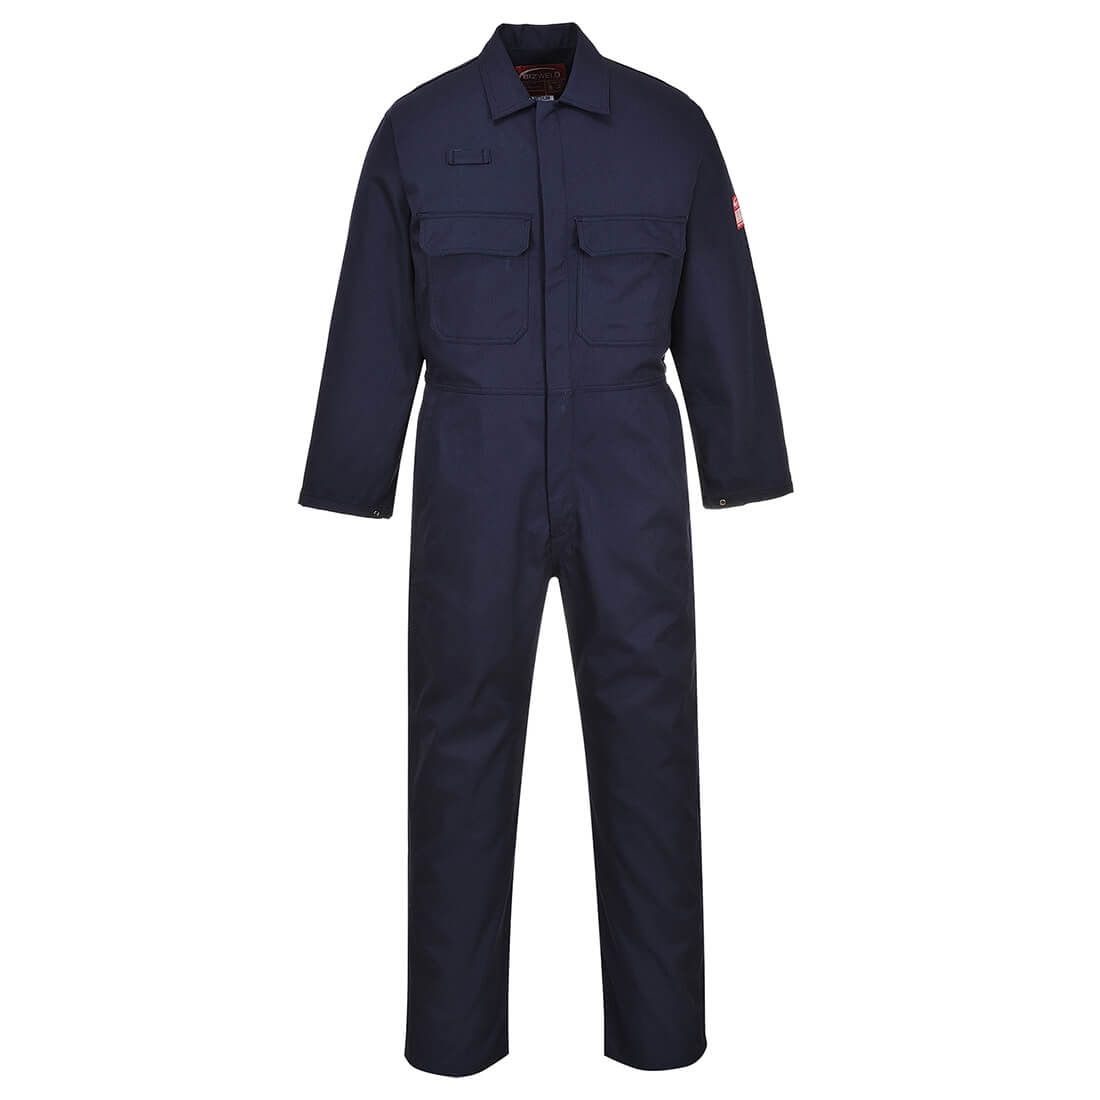 Image of Biz Weld Mens Flame Resistant Overall Navy Blue 4XL 32"